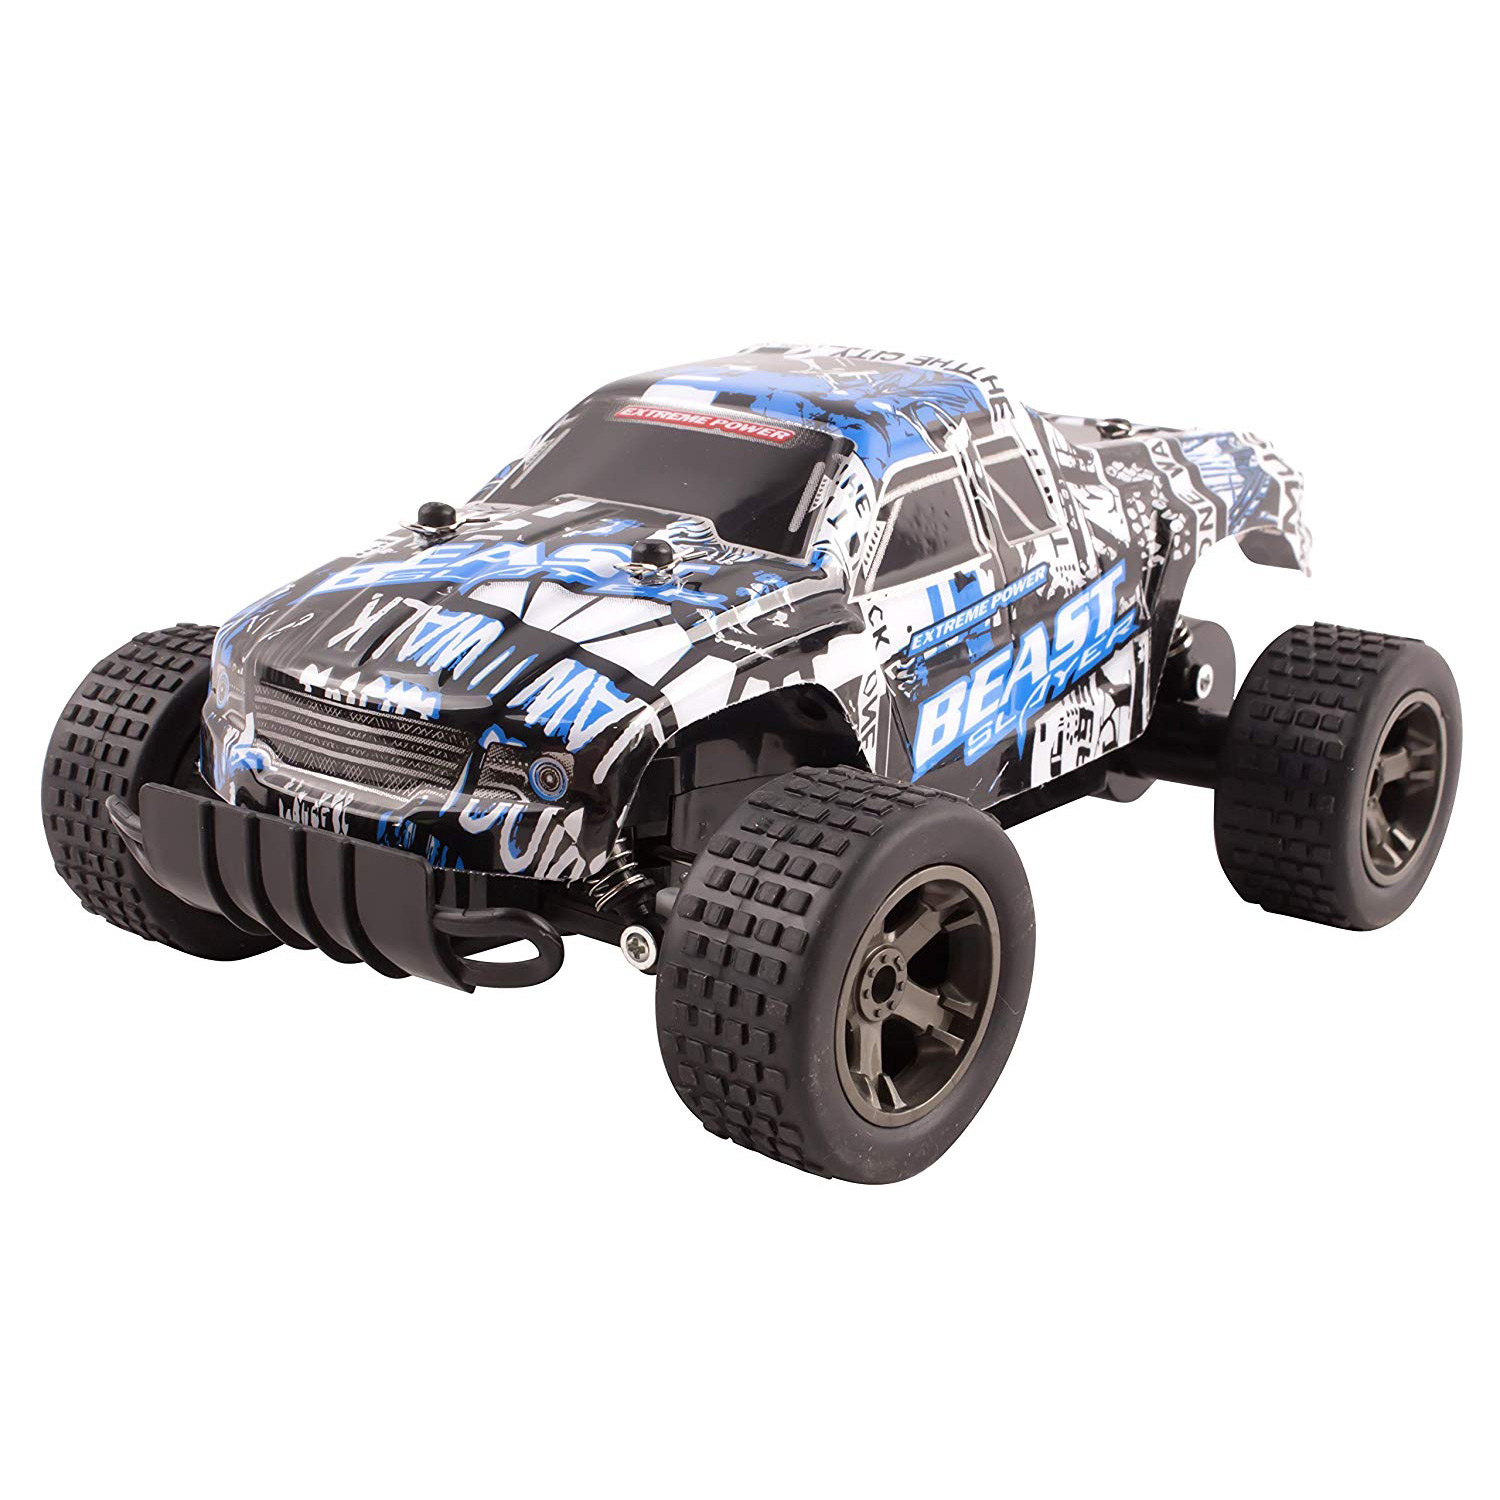 RC Truck Beast Cheetah King Buggy Remote Control 2.4 GHz System 1:18 Scale Size Car RTR With Working Suspension High Speed Radio Control Off-Road Hobby Truggy Rechargeable Battery Included (Blue)